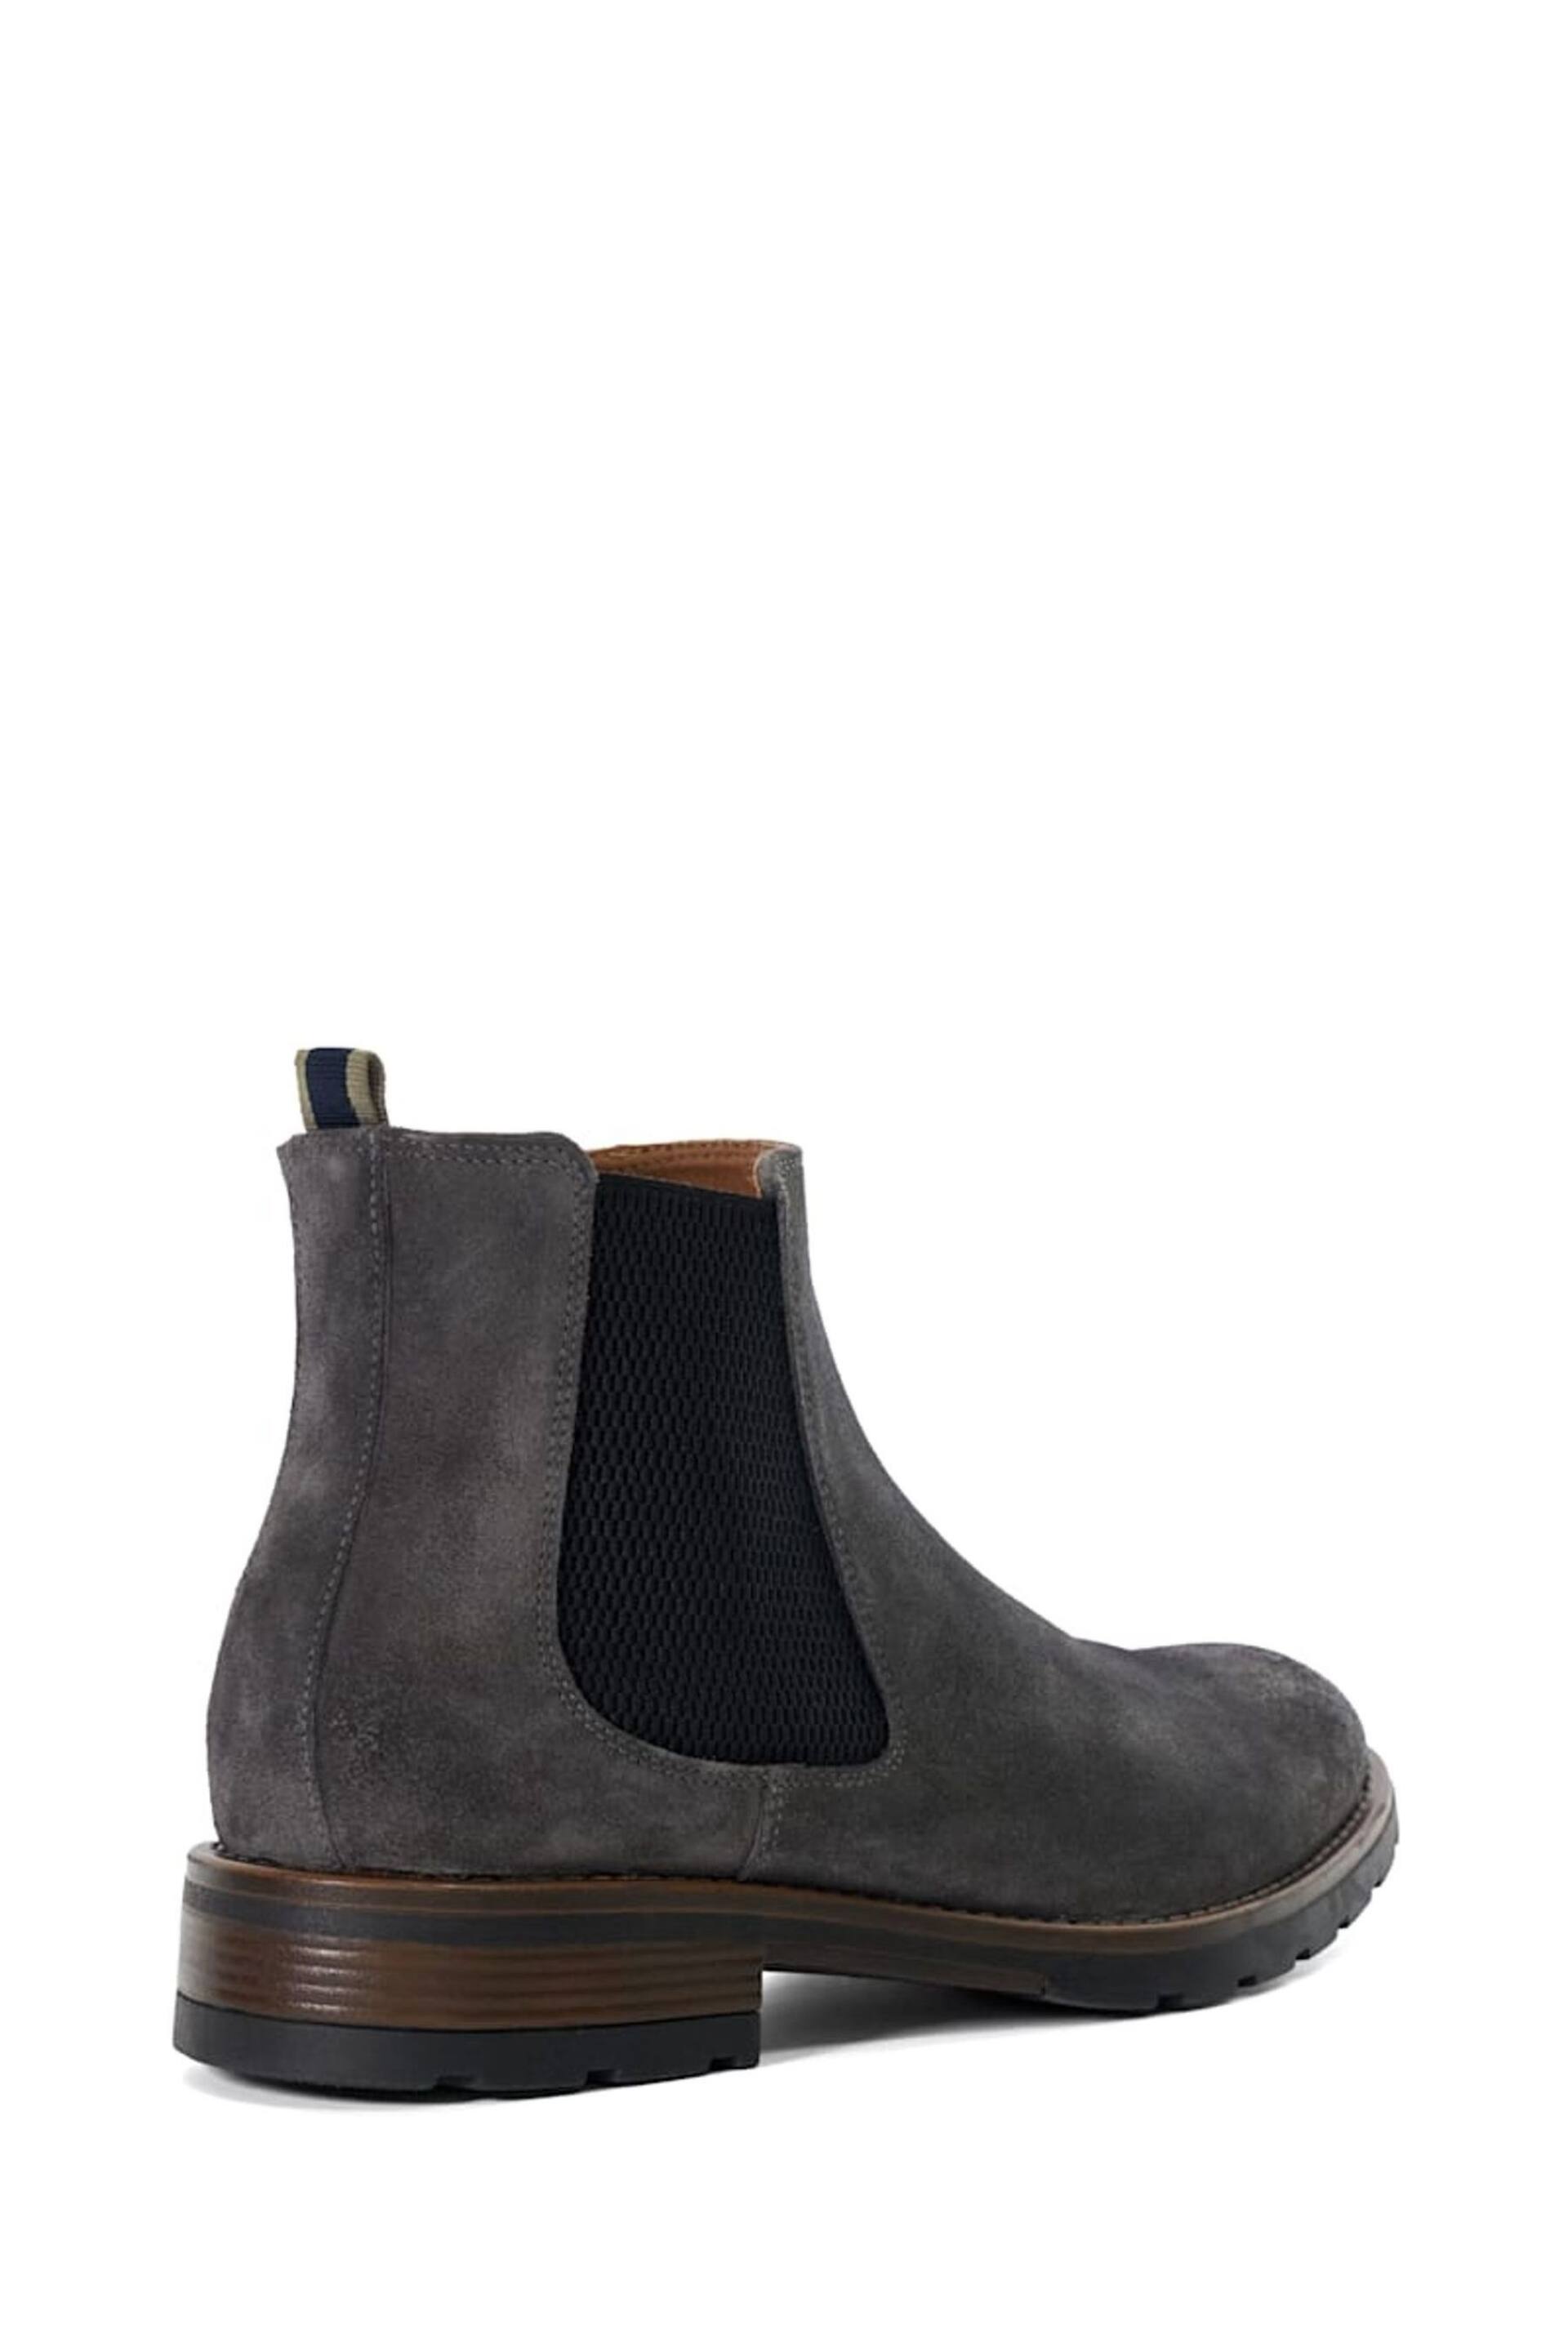 Dune London Grey Chelty Brushed Suede Chelsea Boots - Image 4 of 5